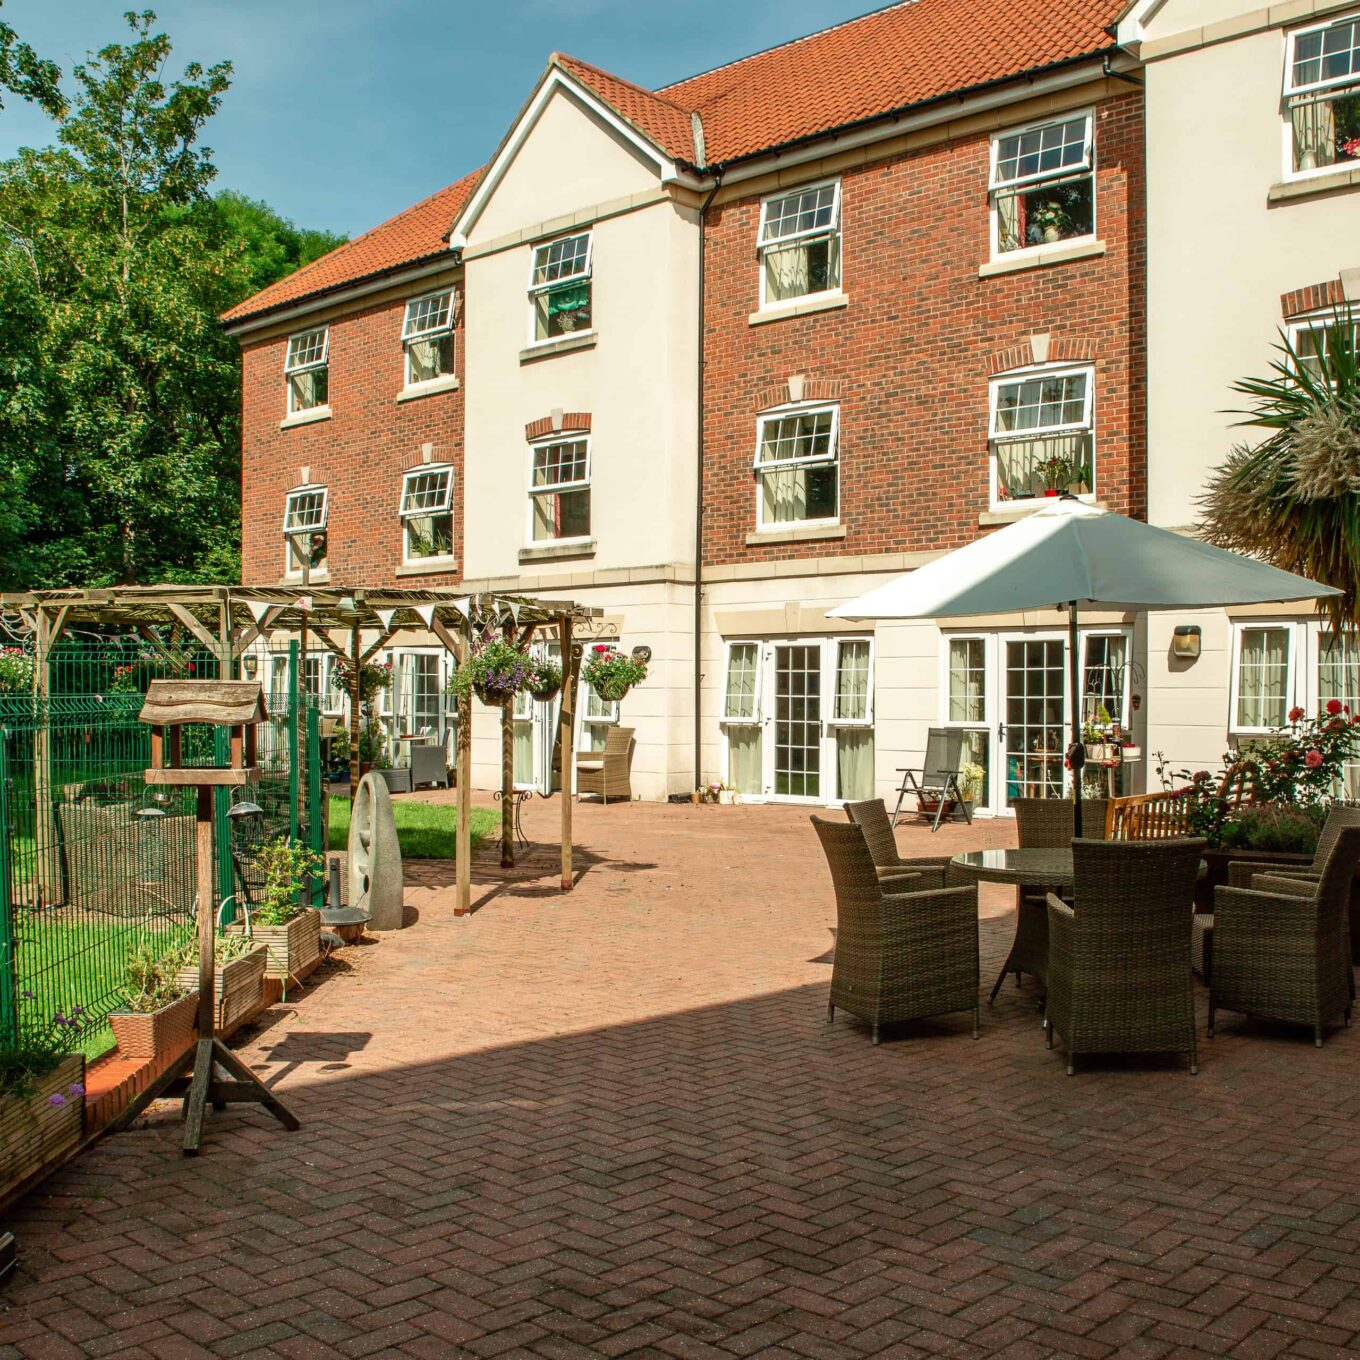 Outdoor garden patio area at Woodland Grove Care Home in Loughton, Essex